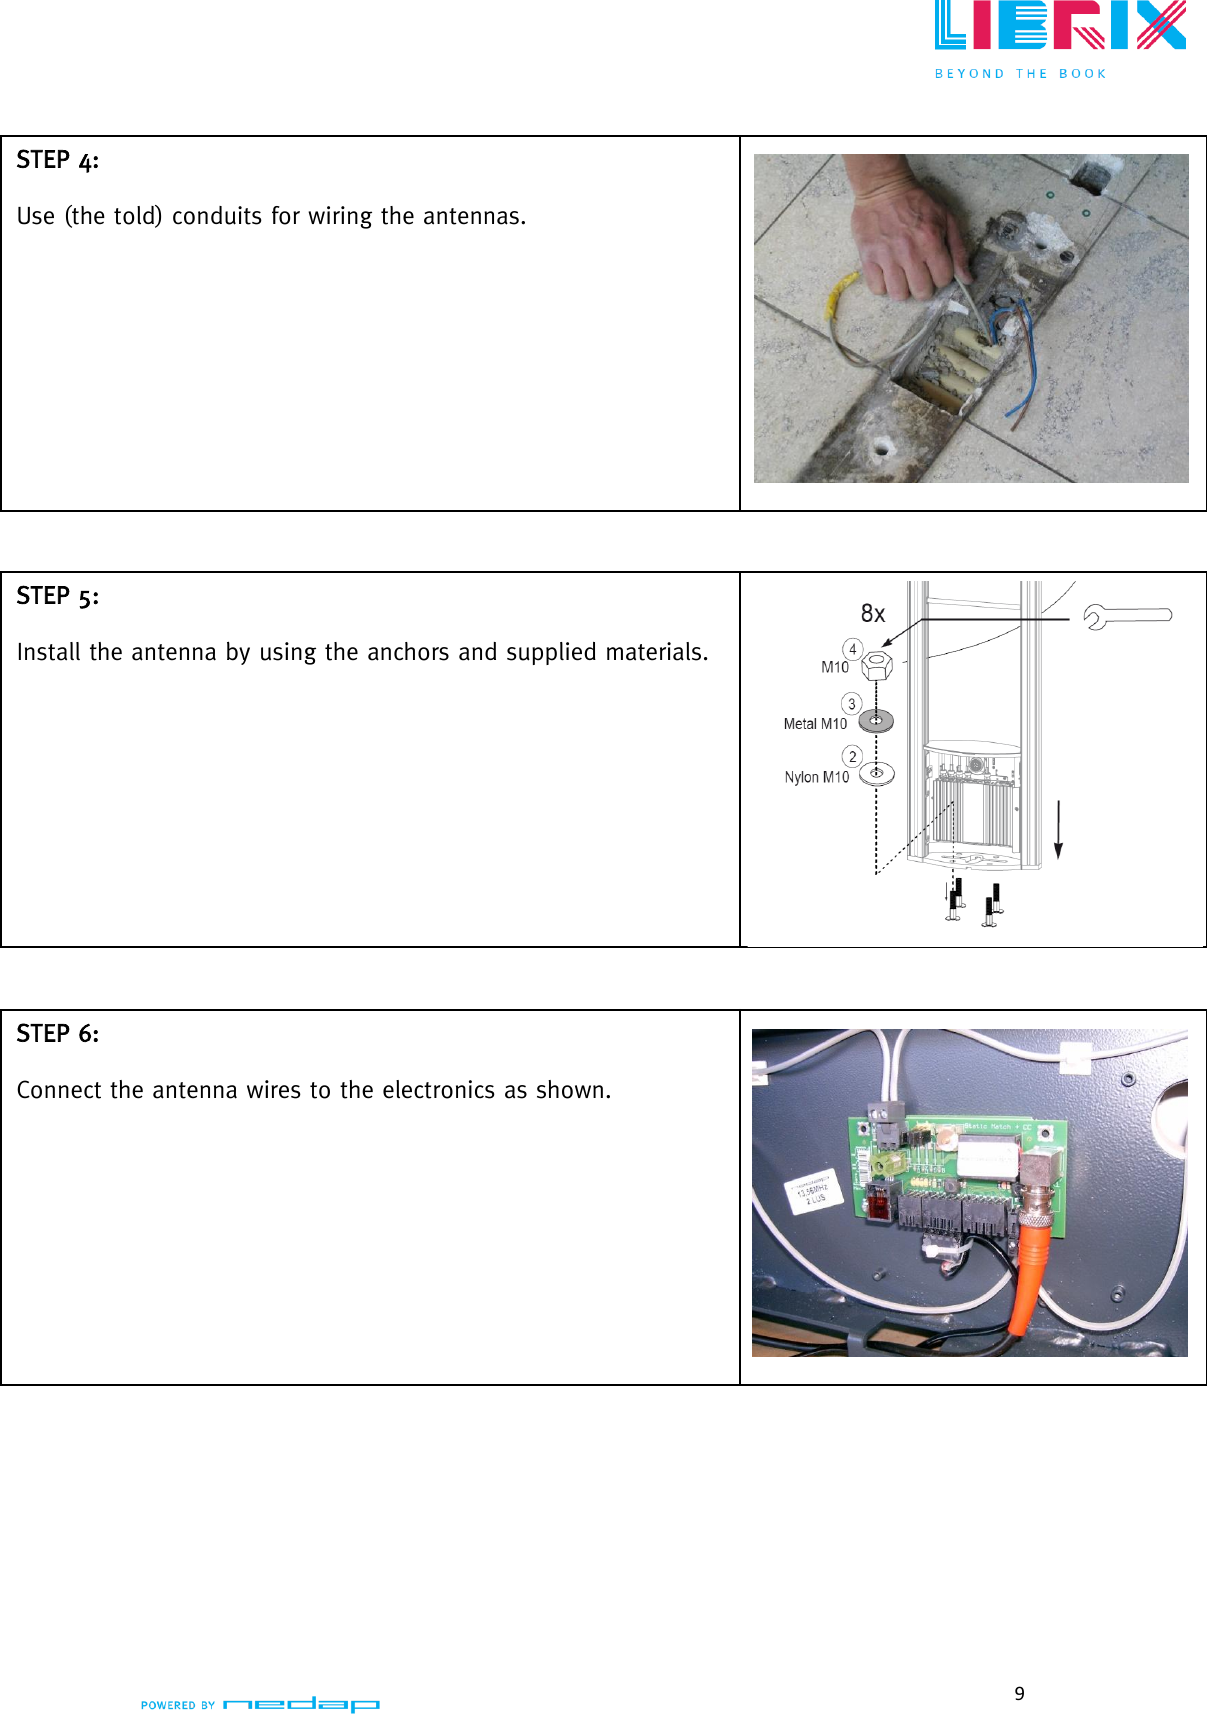  9                          STEP 4:  Use (the told) conduits for wiring the antennas.  STEP 5:  Install the antenna by using the anchors and supplied materials.  STEP 6:  Connect the antenna wires to the electronics as shown.   